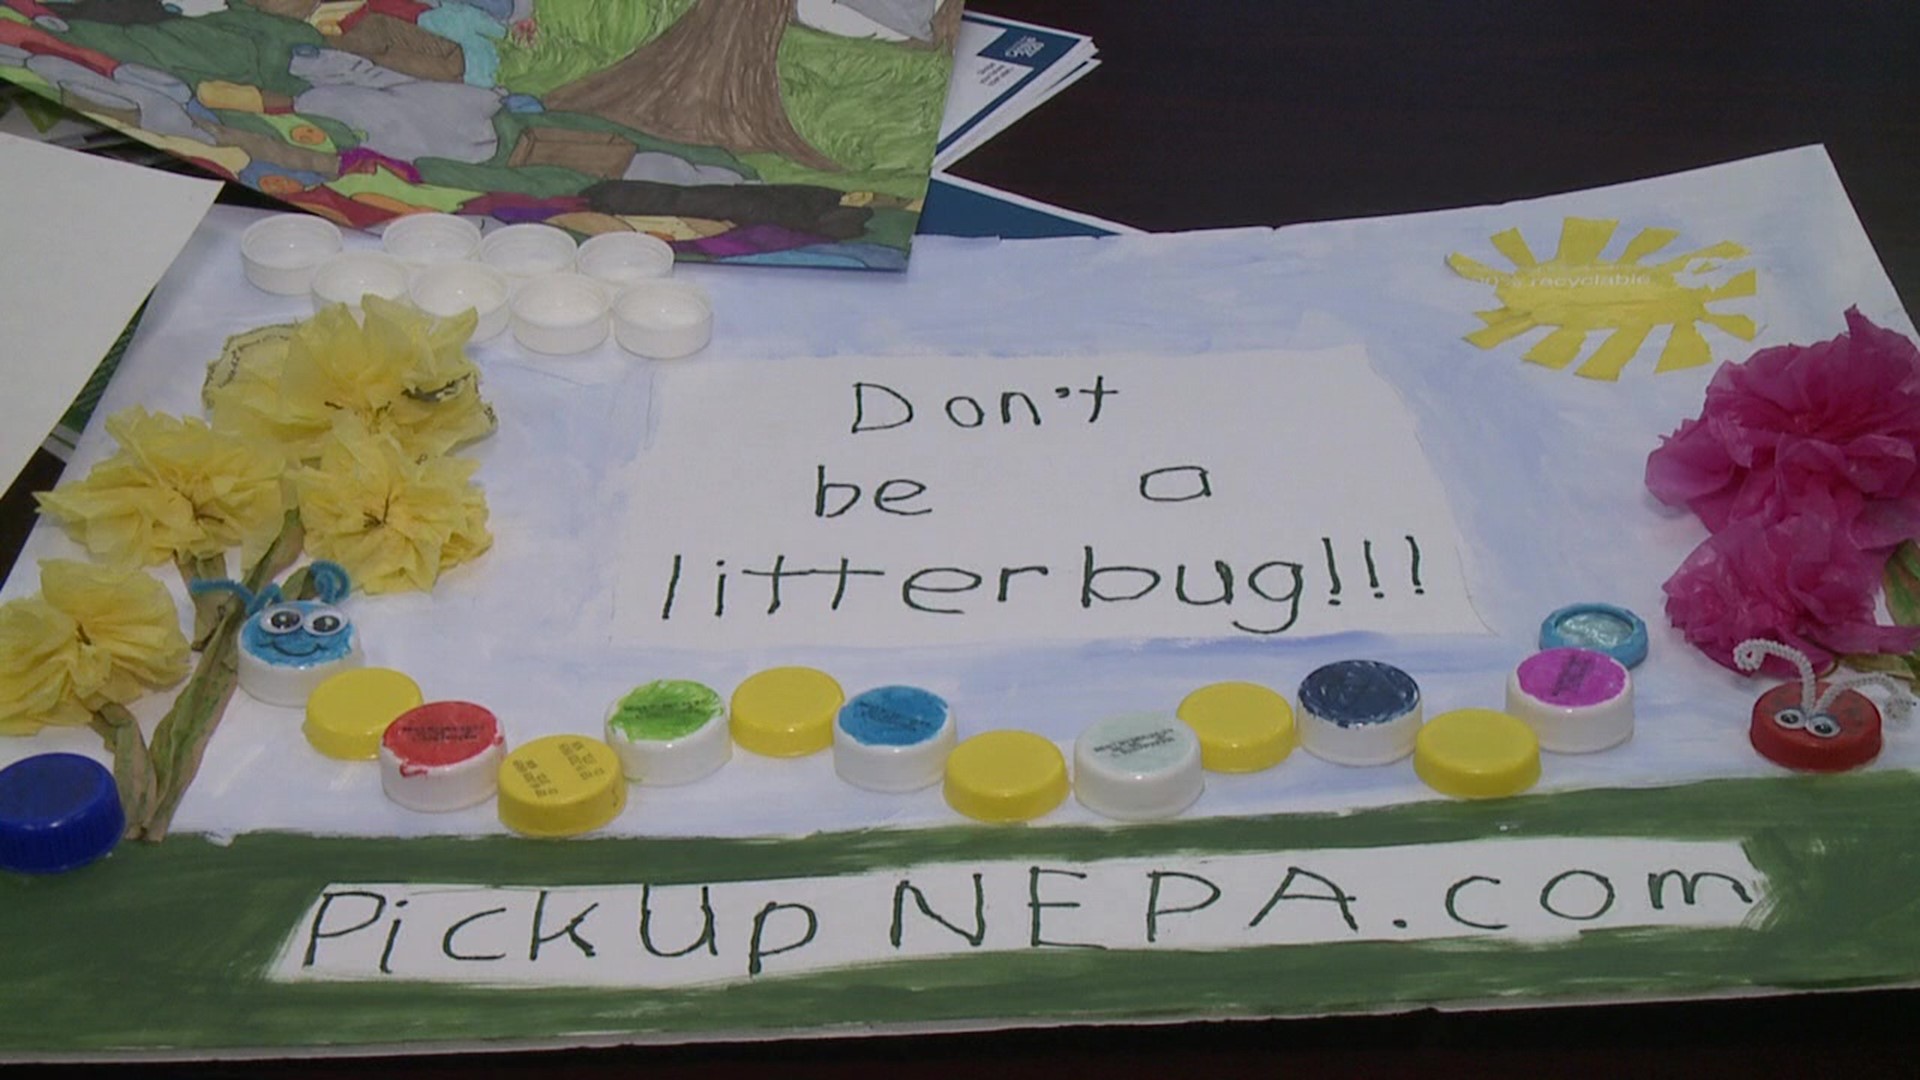 The plan is to distribute anti-littering signs that were designed by students in a county-wide contest.